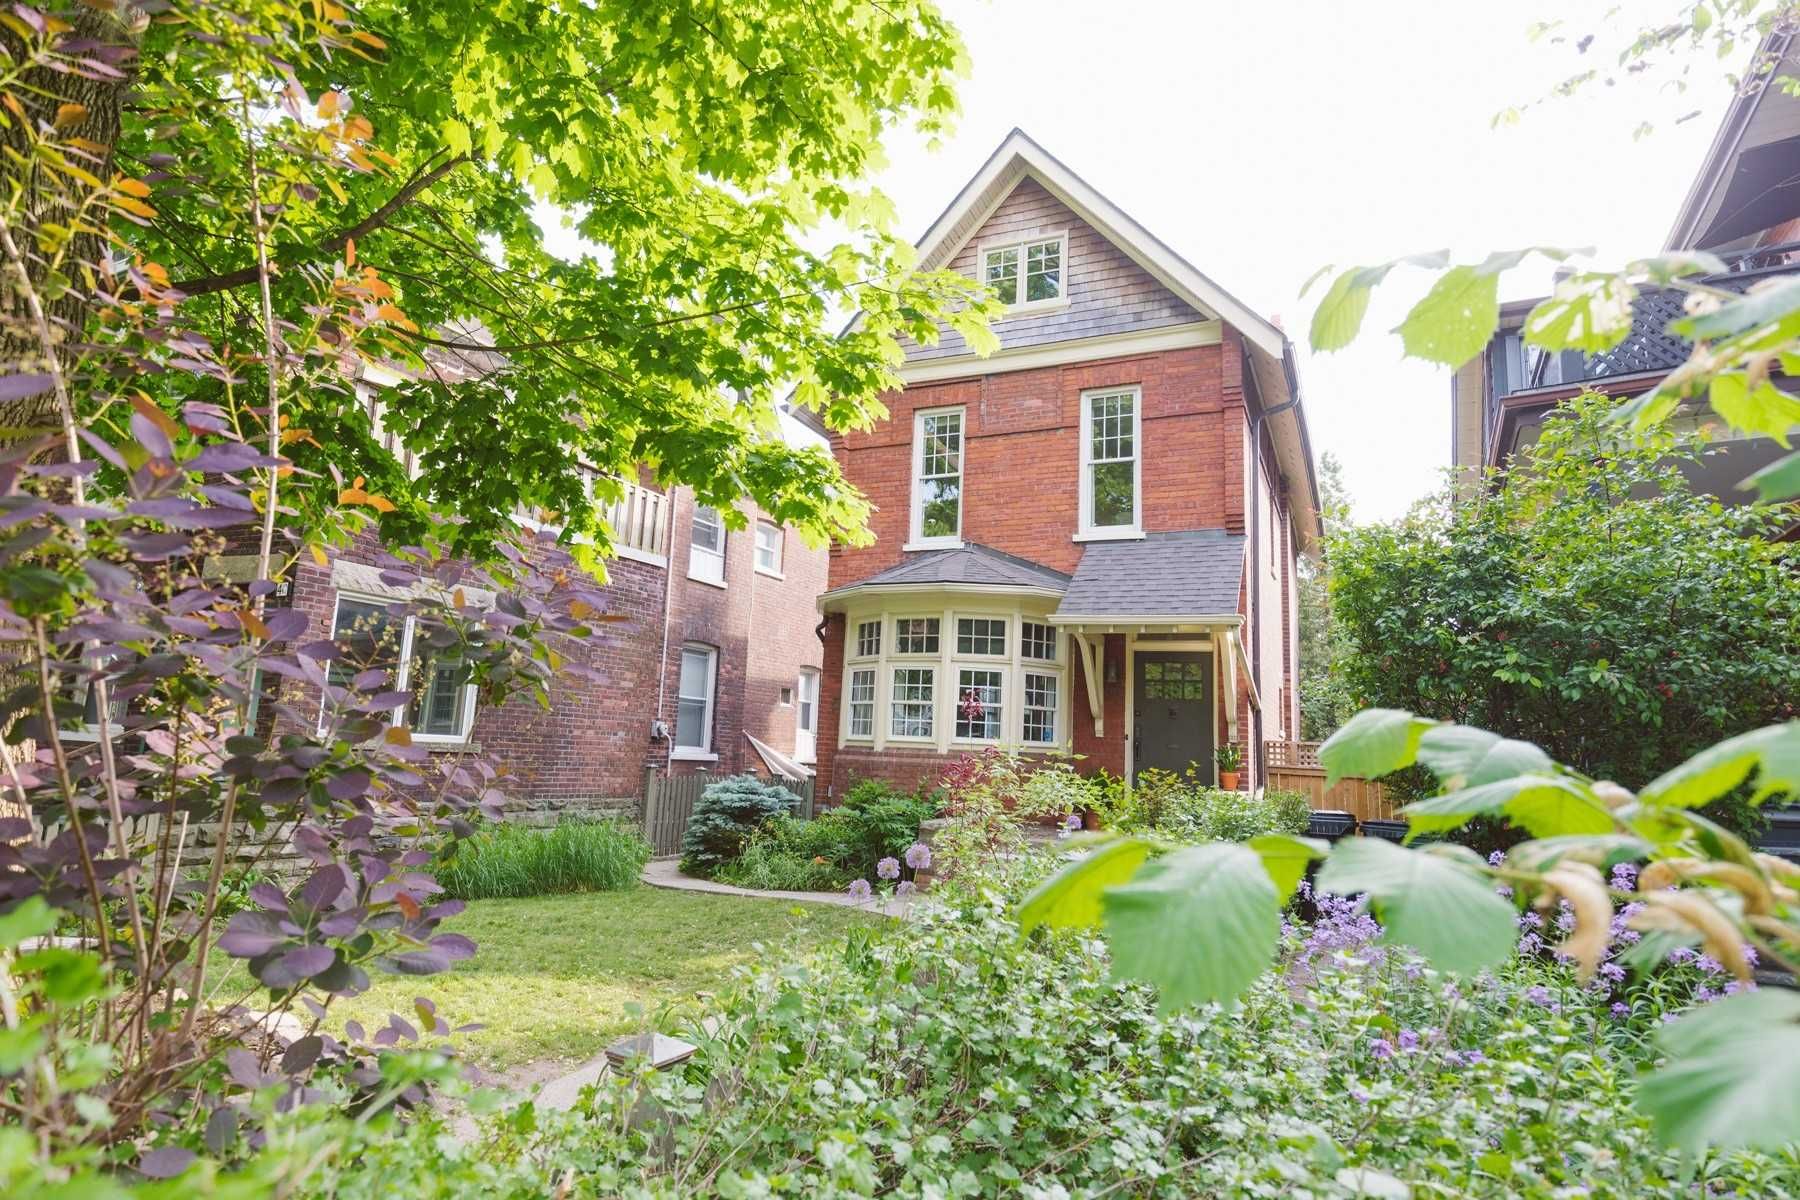 Main Photo: 42 Wilson Park Road in Toronto: South Parkdale House (2 1/2 Storey) for sale (Toronto W01)  : MLS®# W5272344